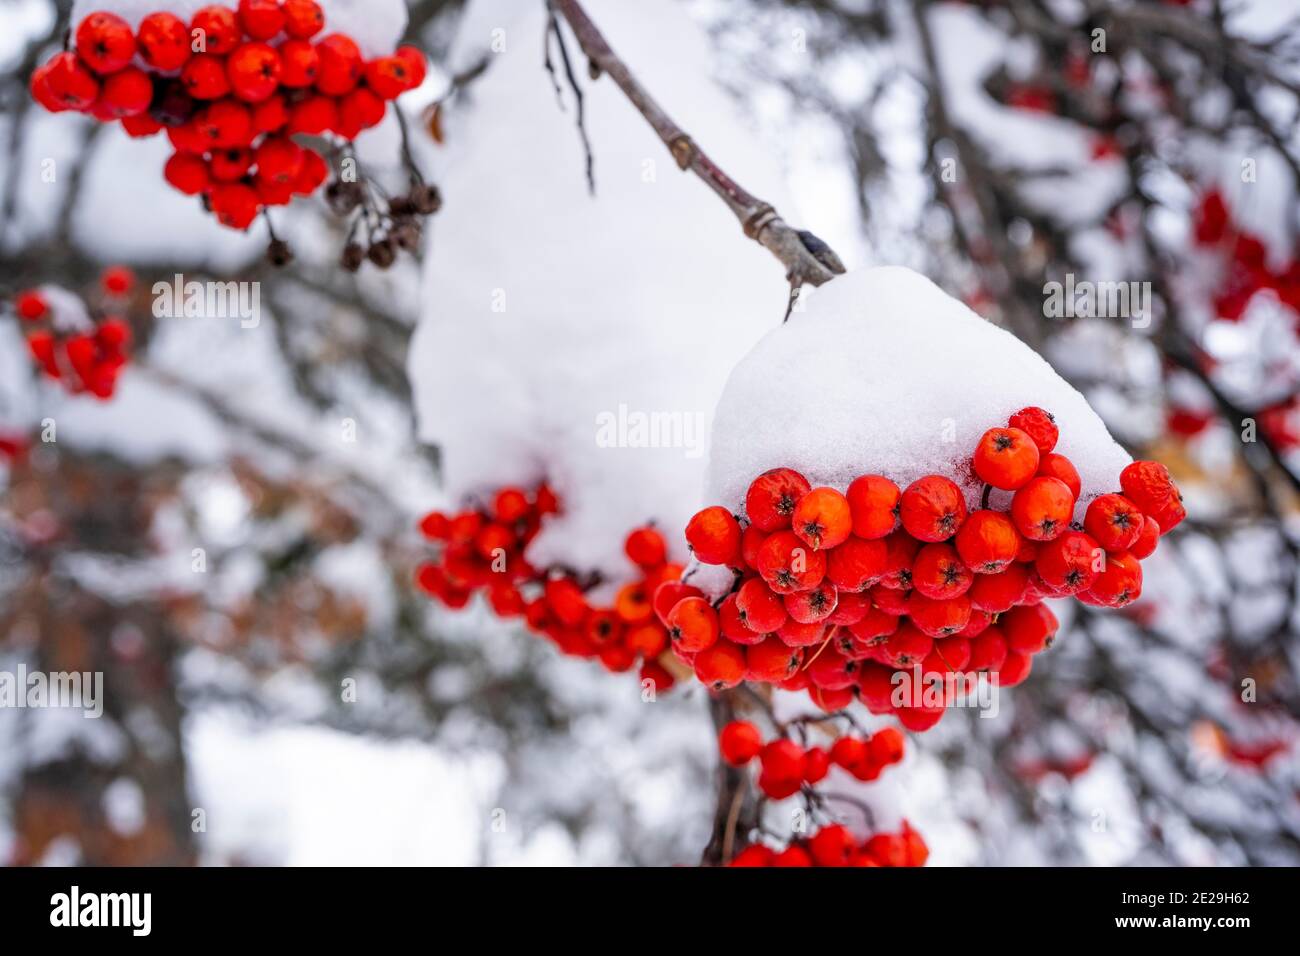 Winter ashberry under the snow close up. Groups of bright red berries ...